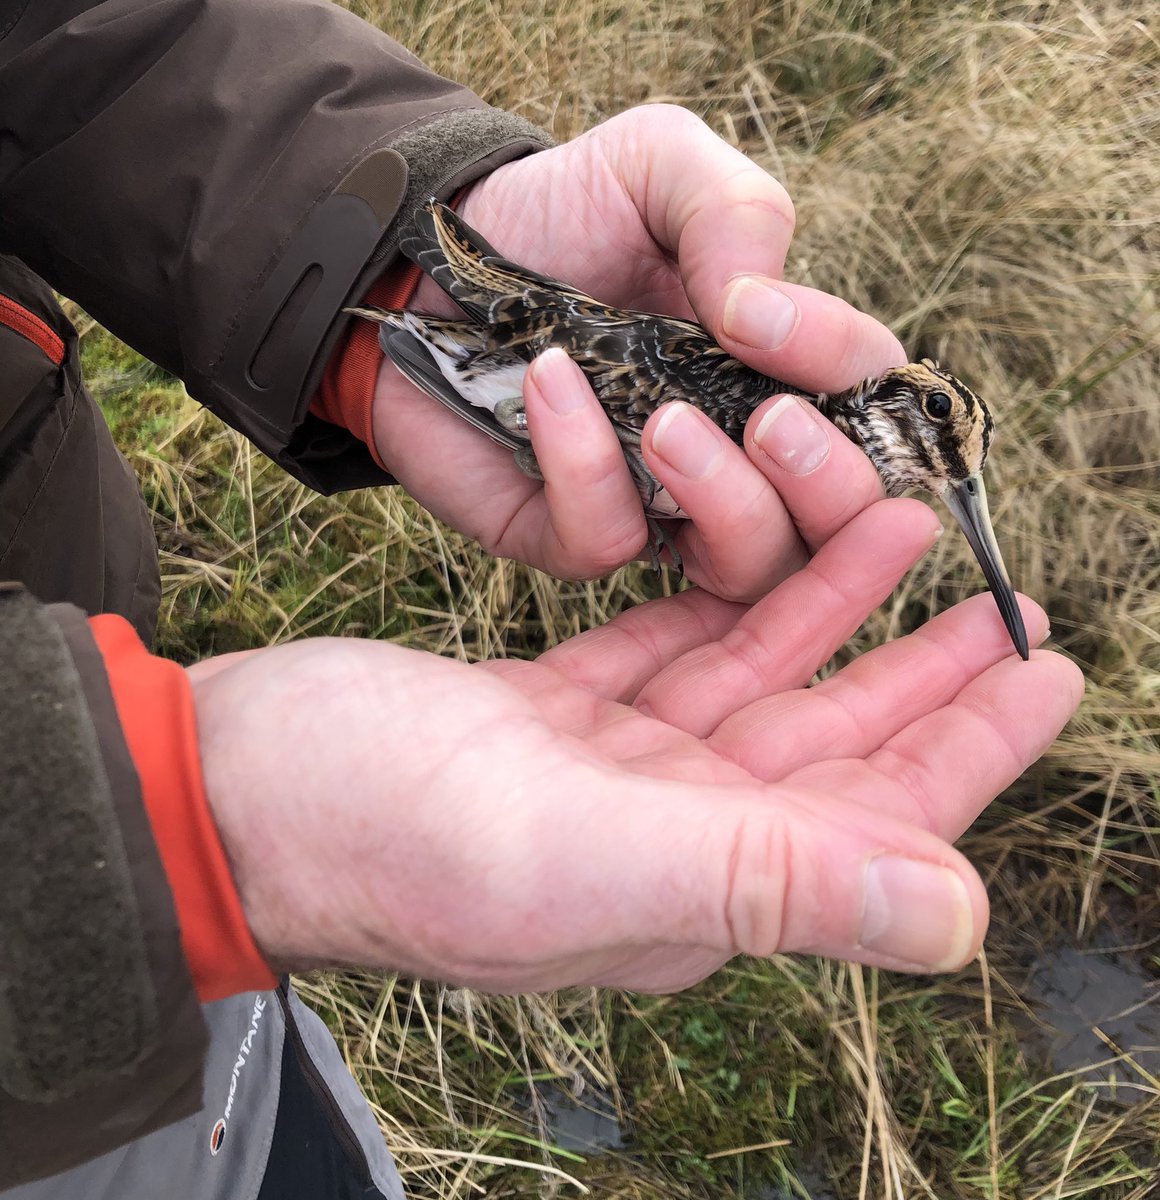 Last year we had our Bob (should be call Sink not Bob🌊😄) out on his fust JackSnipe catch. 
He didn’t realise we place them back where we find them & he released it from the palm like a passerine !☺️
Here’s1 ⬇️after ringing nestled back in its roost spot exactly to the inch 😎